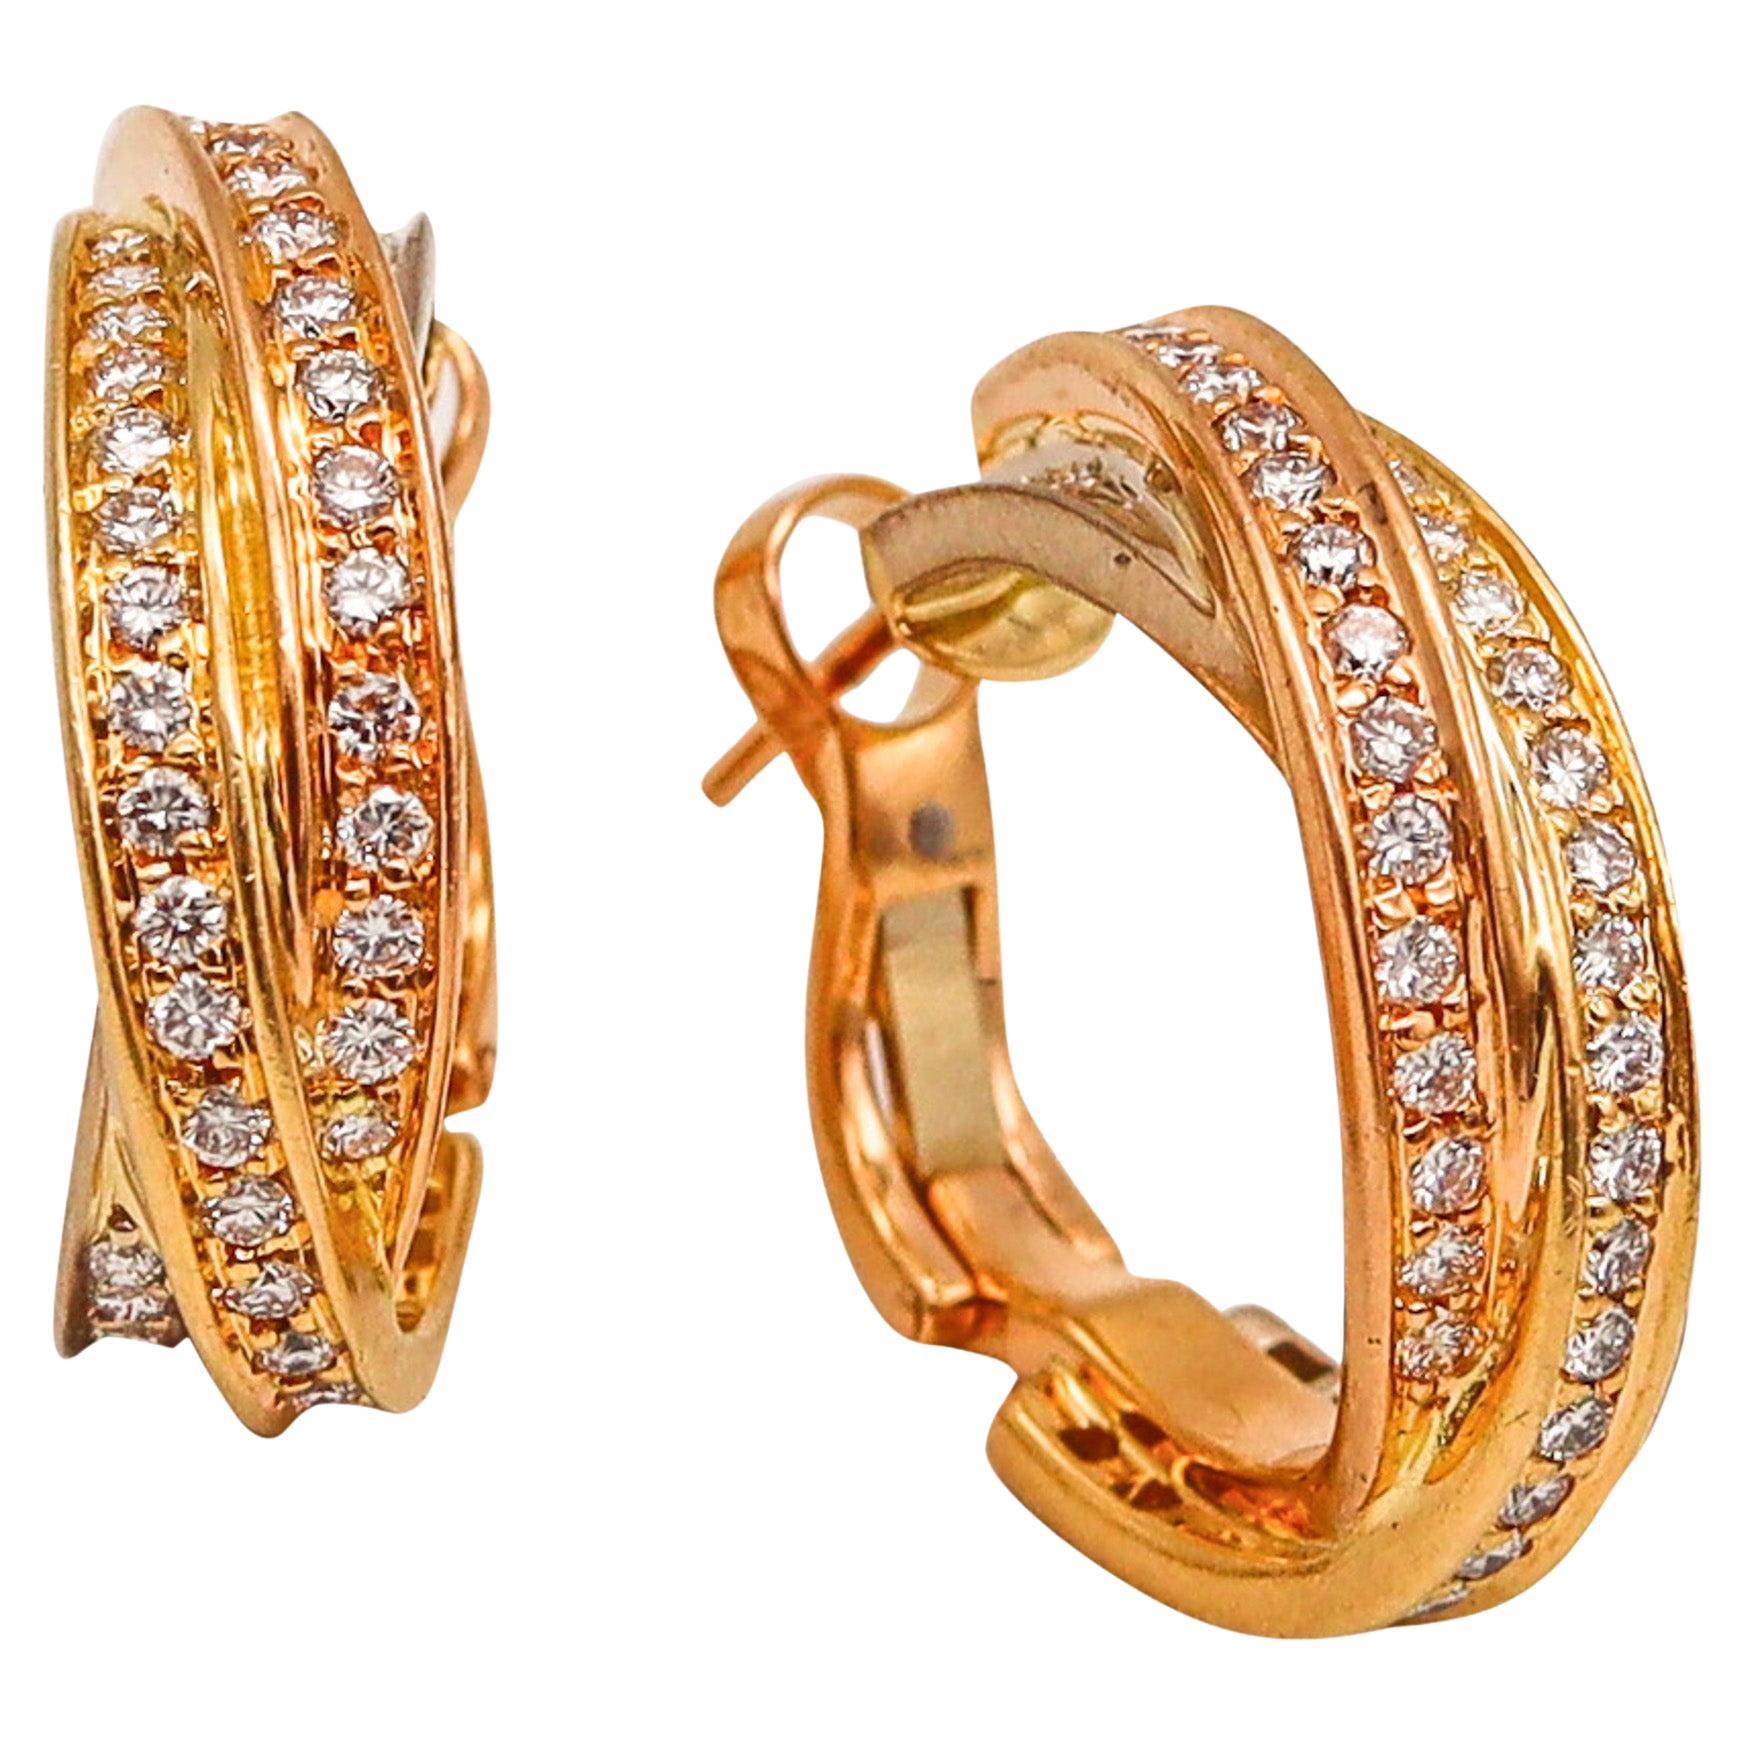 Cartier Paris Trinity Earrings In 18Kt Yellow Gold With 2.07 Ctw In Diamonds For Sale